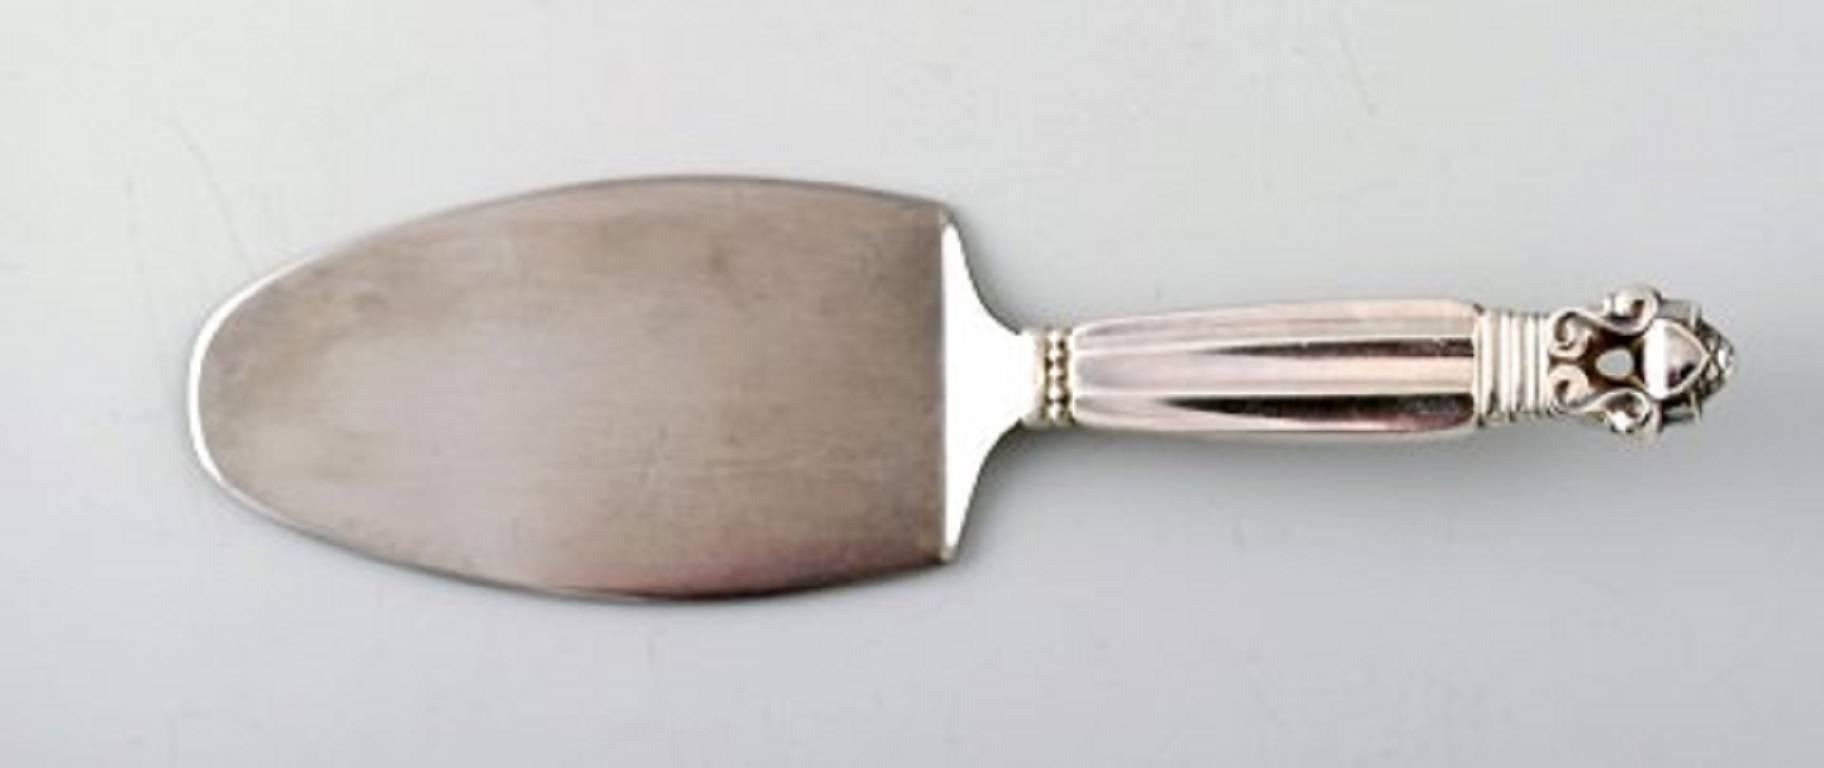 Georg Jensen acorn cake server, sterling silver.
Measures: Length 16 cm.
In very good condition.
Stamped.